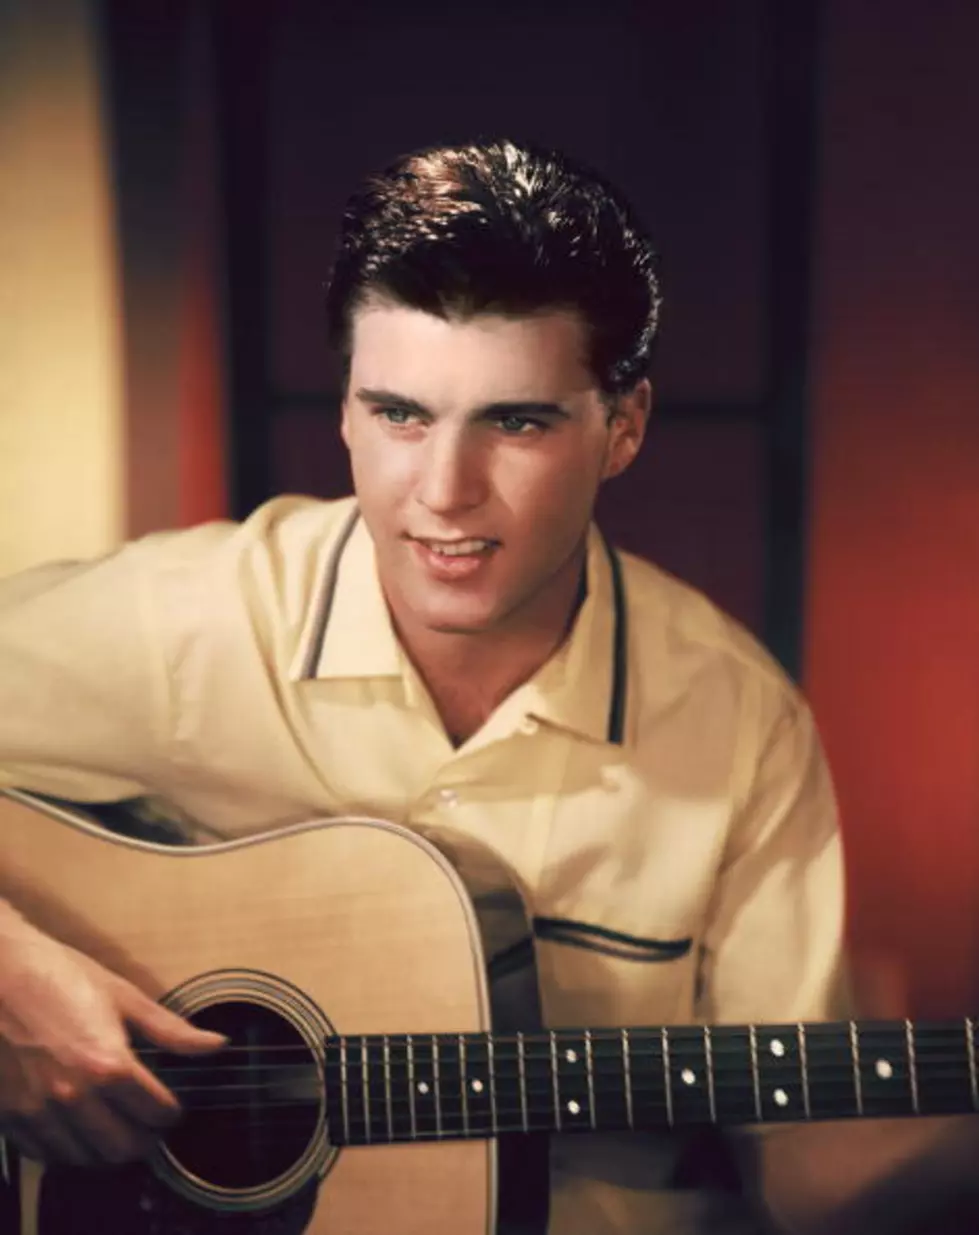 &#8220;Garden Party&#8221; by Rick Nelson-Rayman&#8217;s Song of the Day [VIDEO]